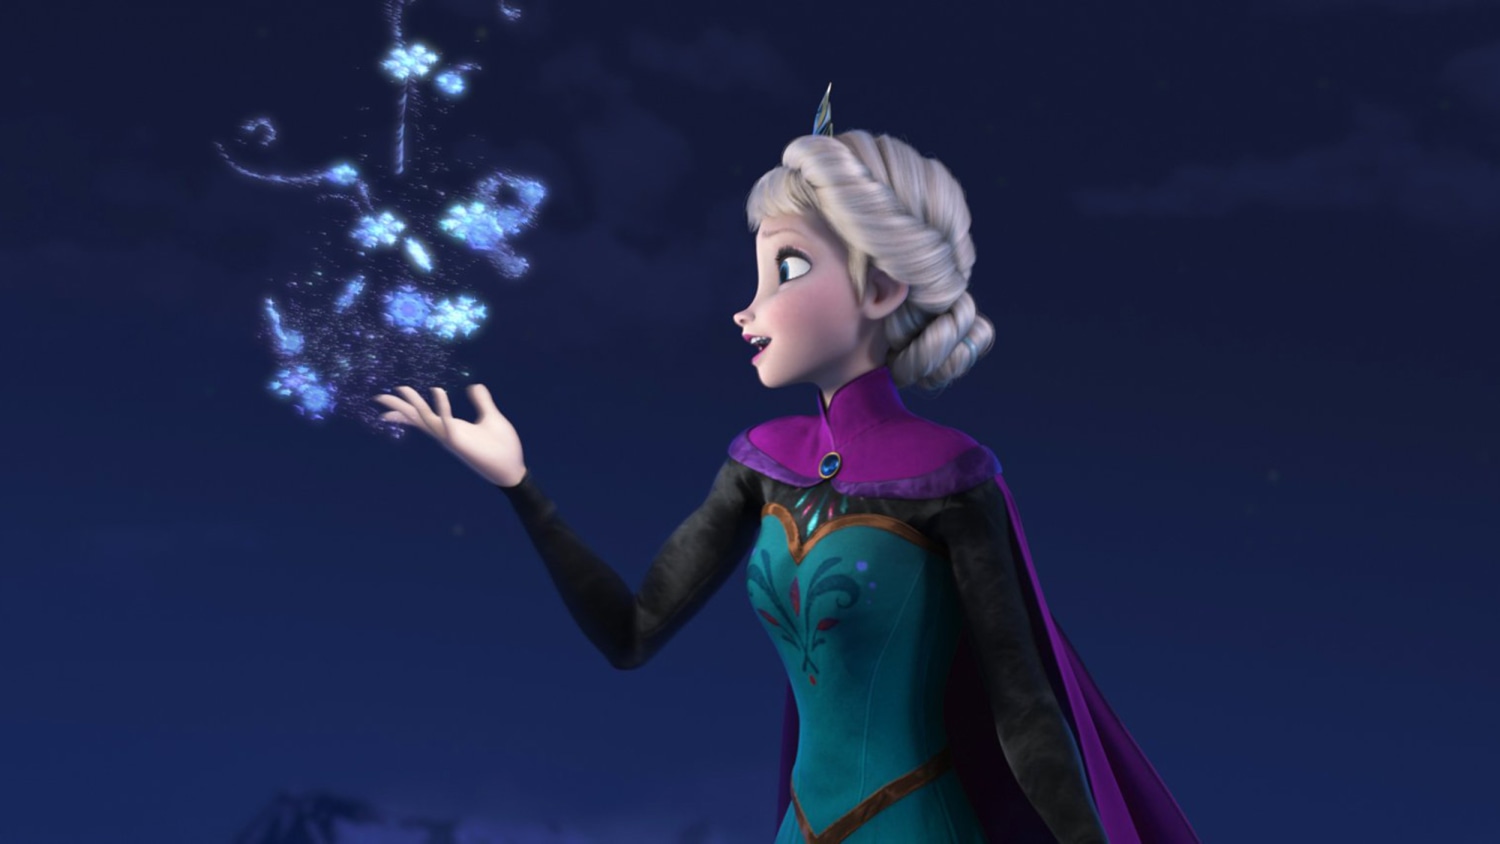 Backlash Over Campaign to Make Elsa From 'Frozen' a Lesbian